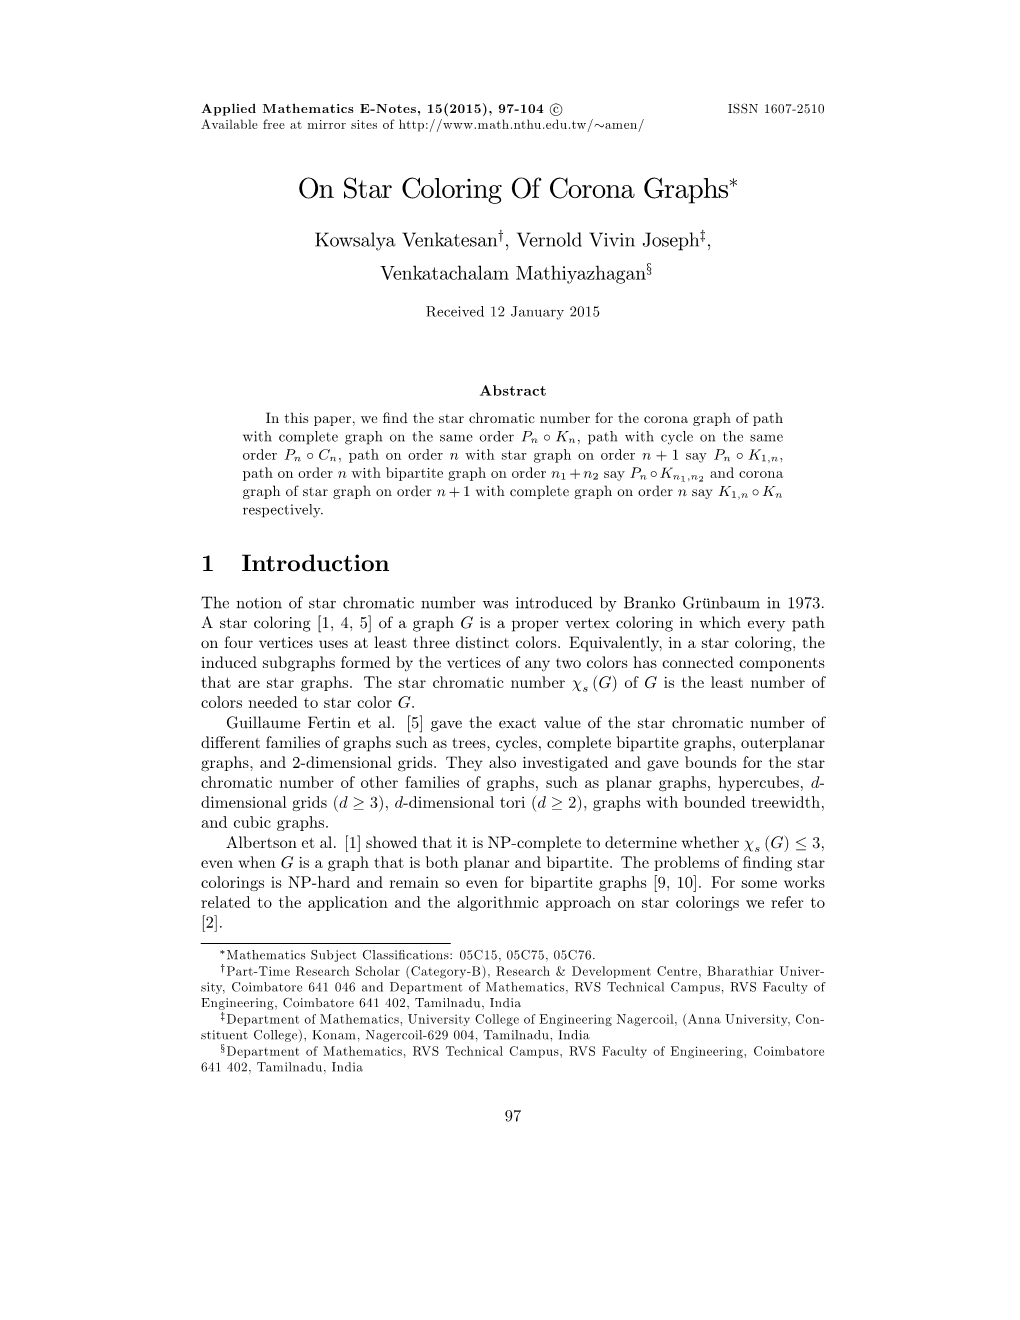 On Star Coloring of Corona Graphs∗